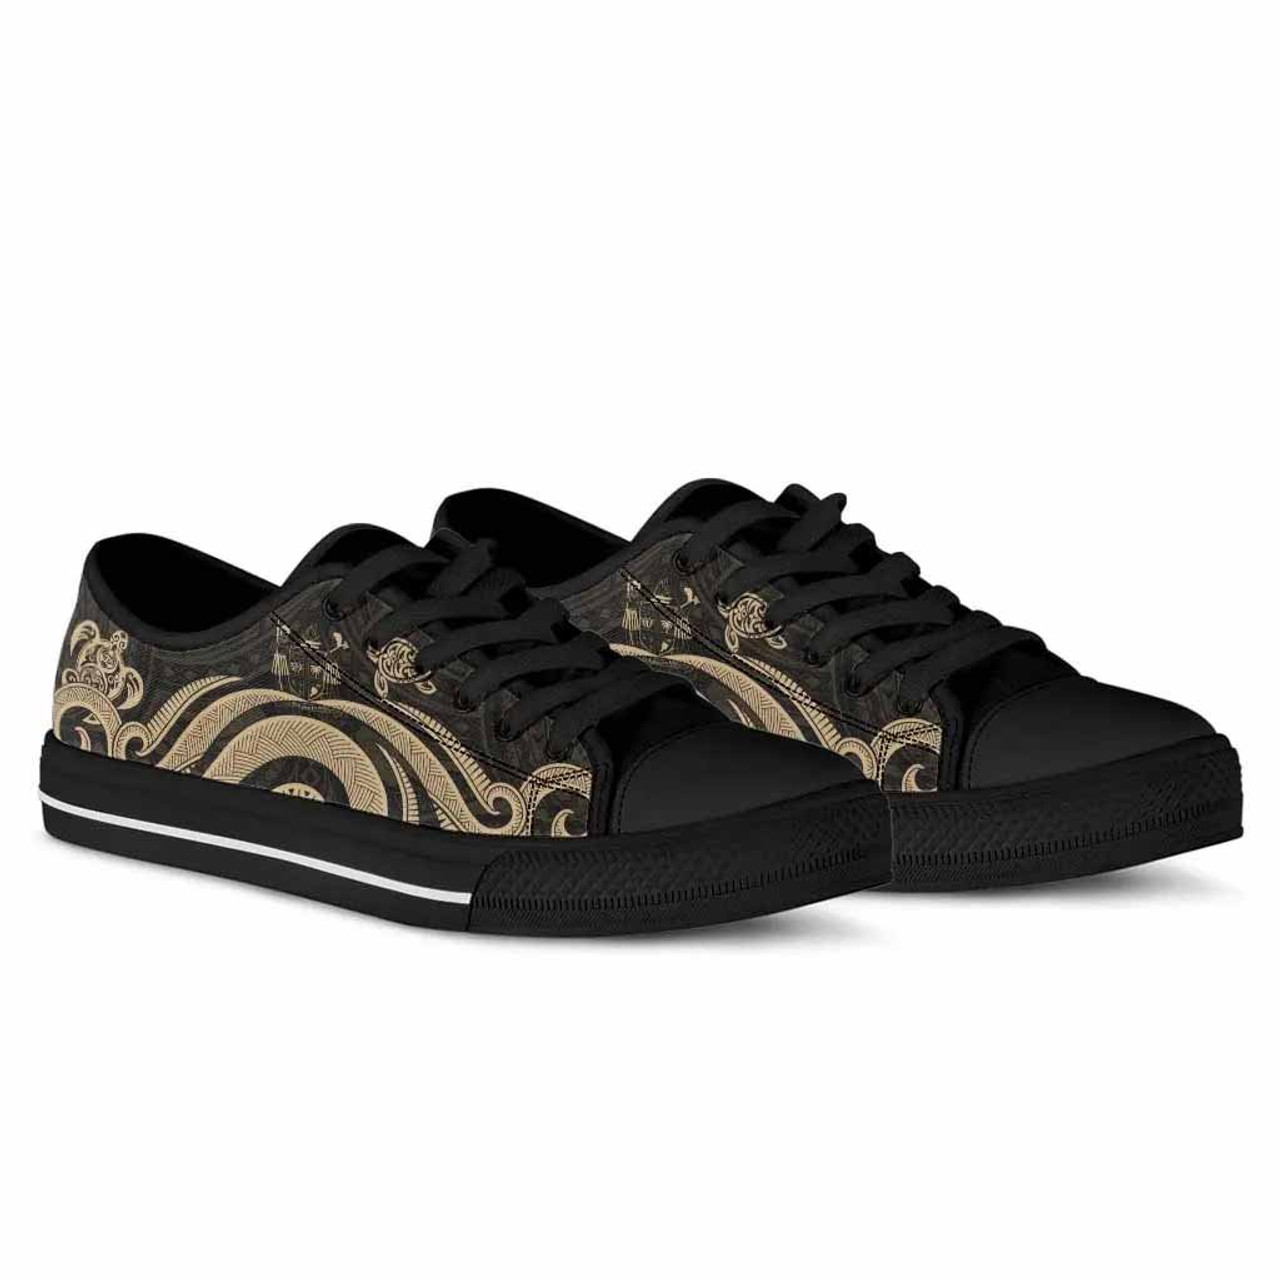 Fiji Low Top Canvas Shoes - Gold Tentacle Turtle Crest 2